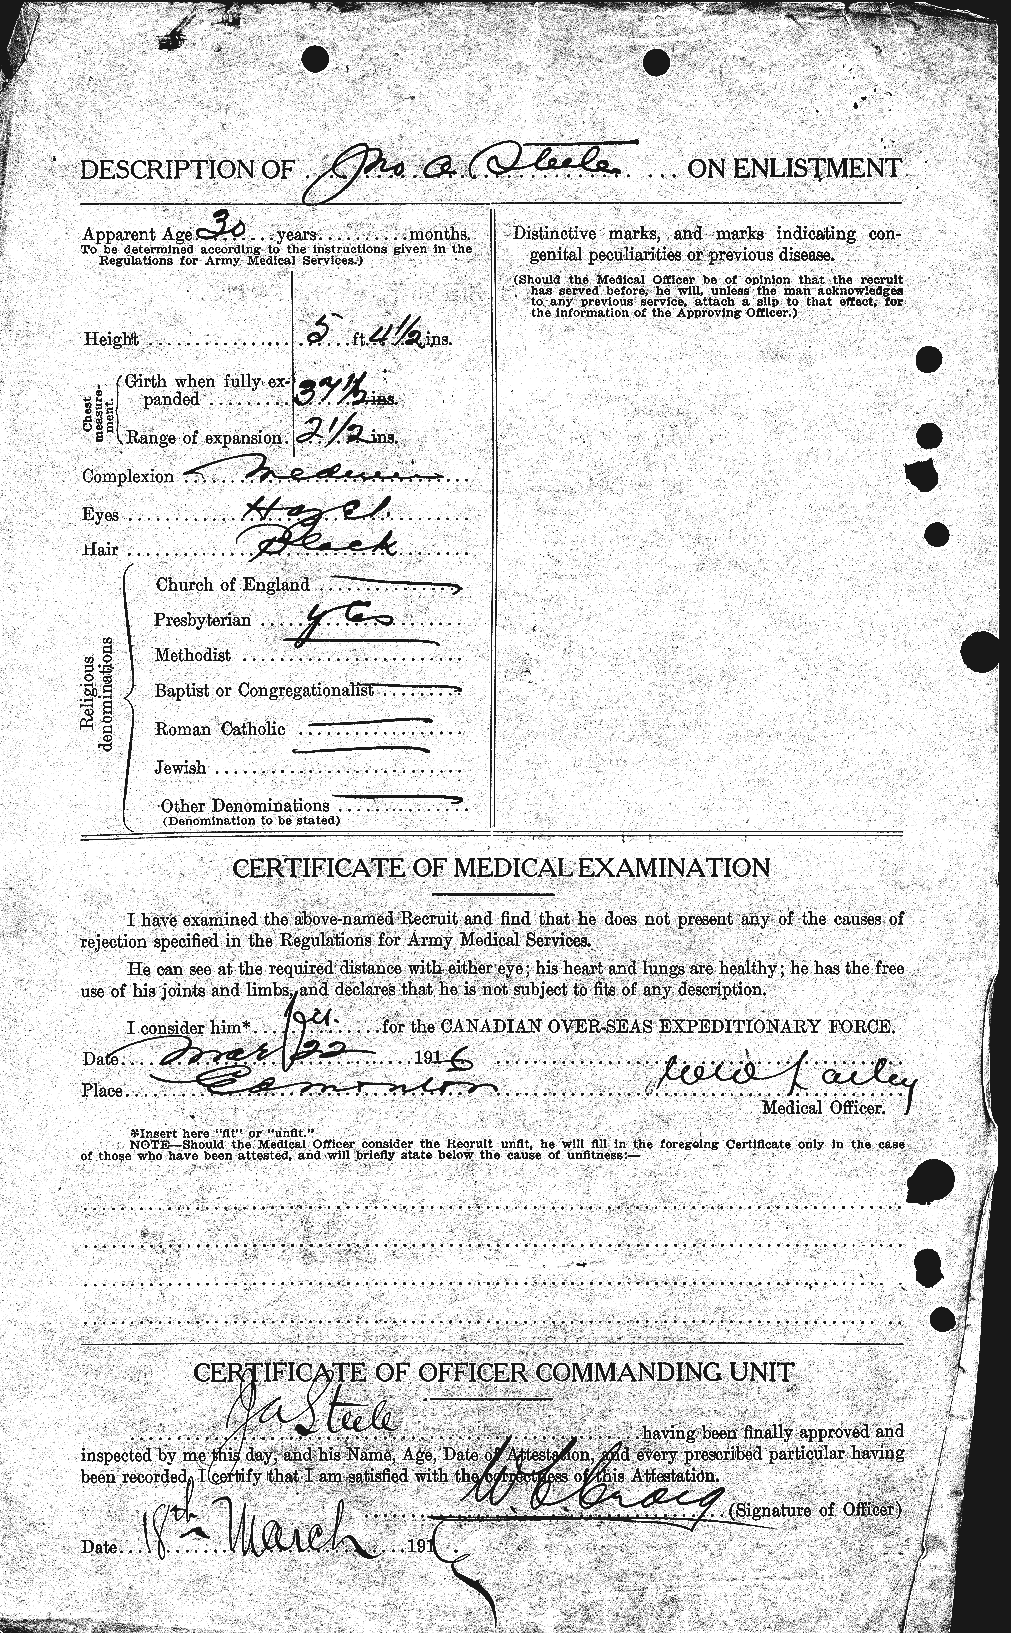 Personnel Records of the First World War - CEF 115378b